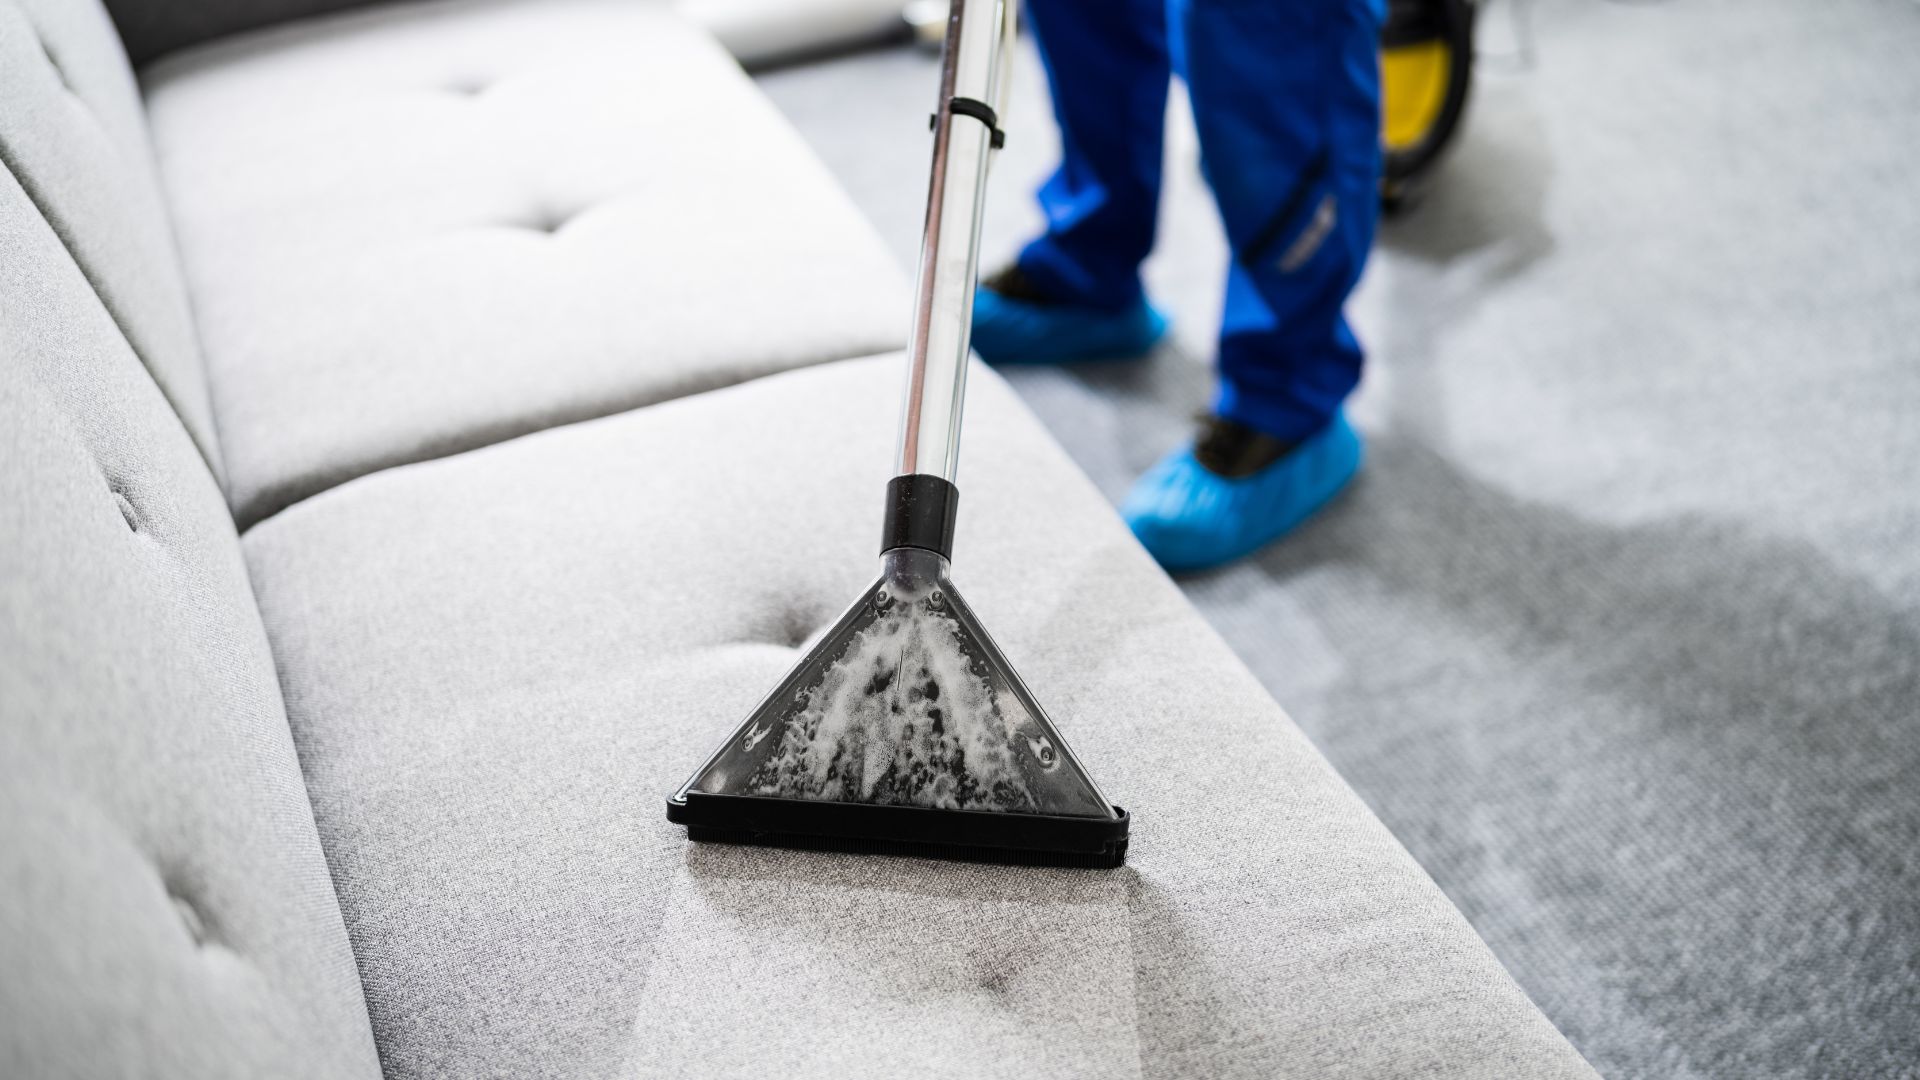 How Much Does an Average House Cleaning Service Cost in 2023?